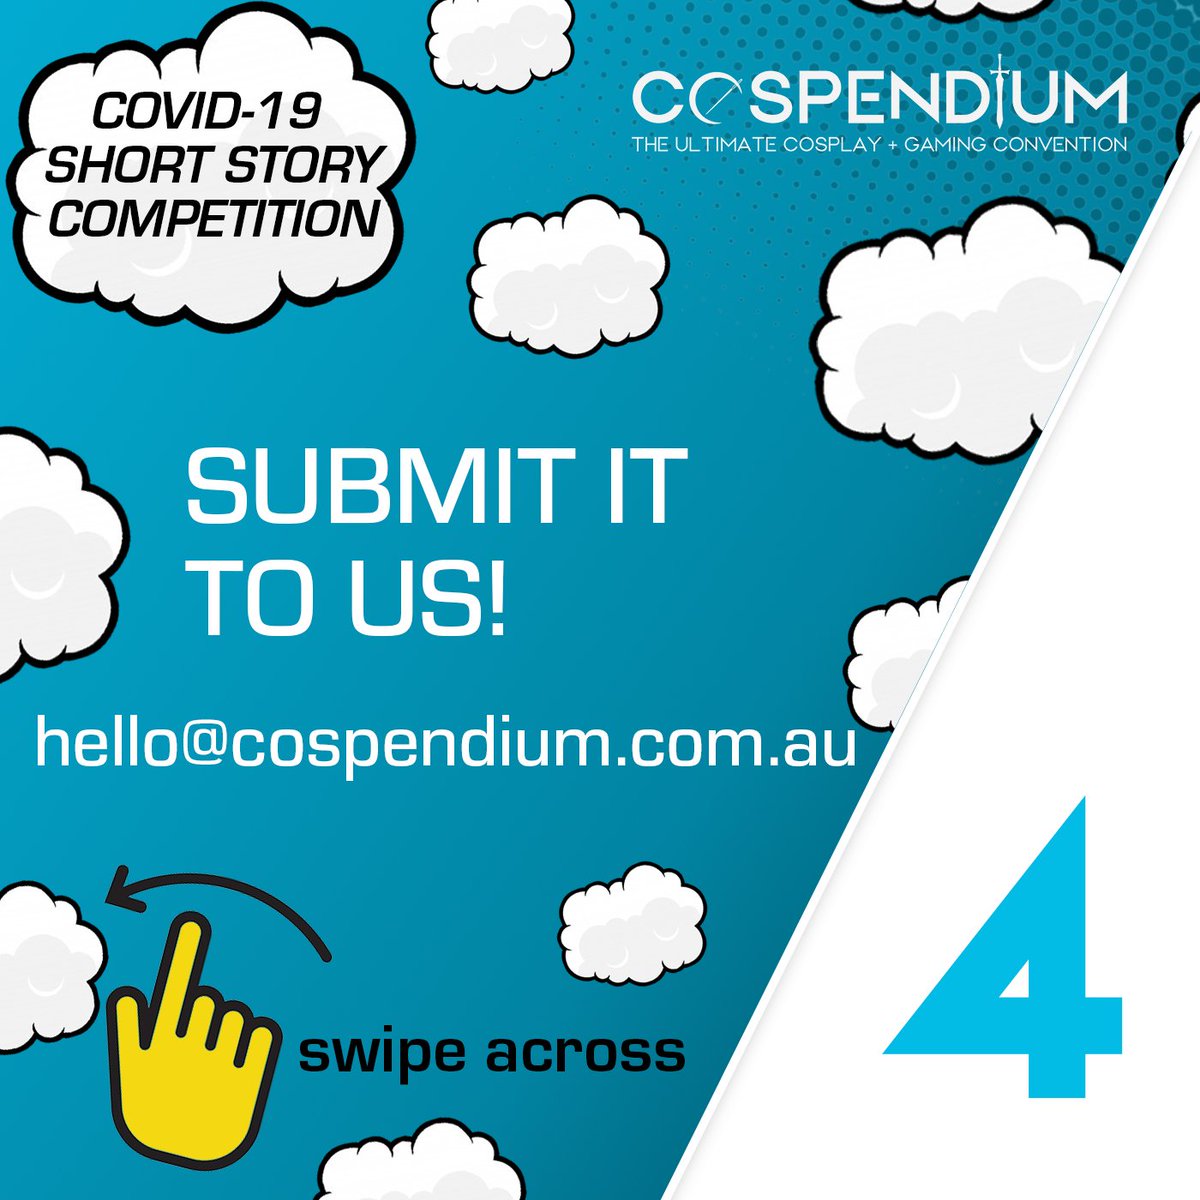 How to enter the COVID-19 Short Story Competition, in 4 easy steps.

You have to be in it to win it!
www,cospendium.com.au/creators-chall…

#writers
#creatorschallenge